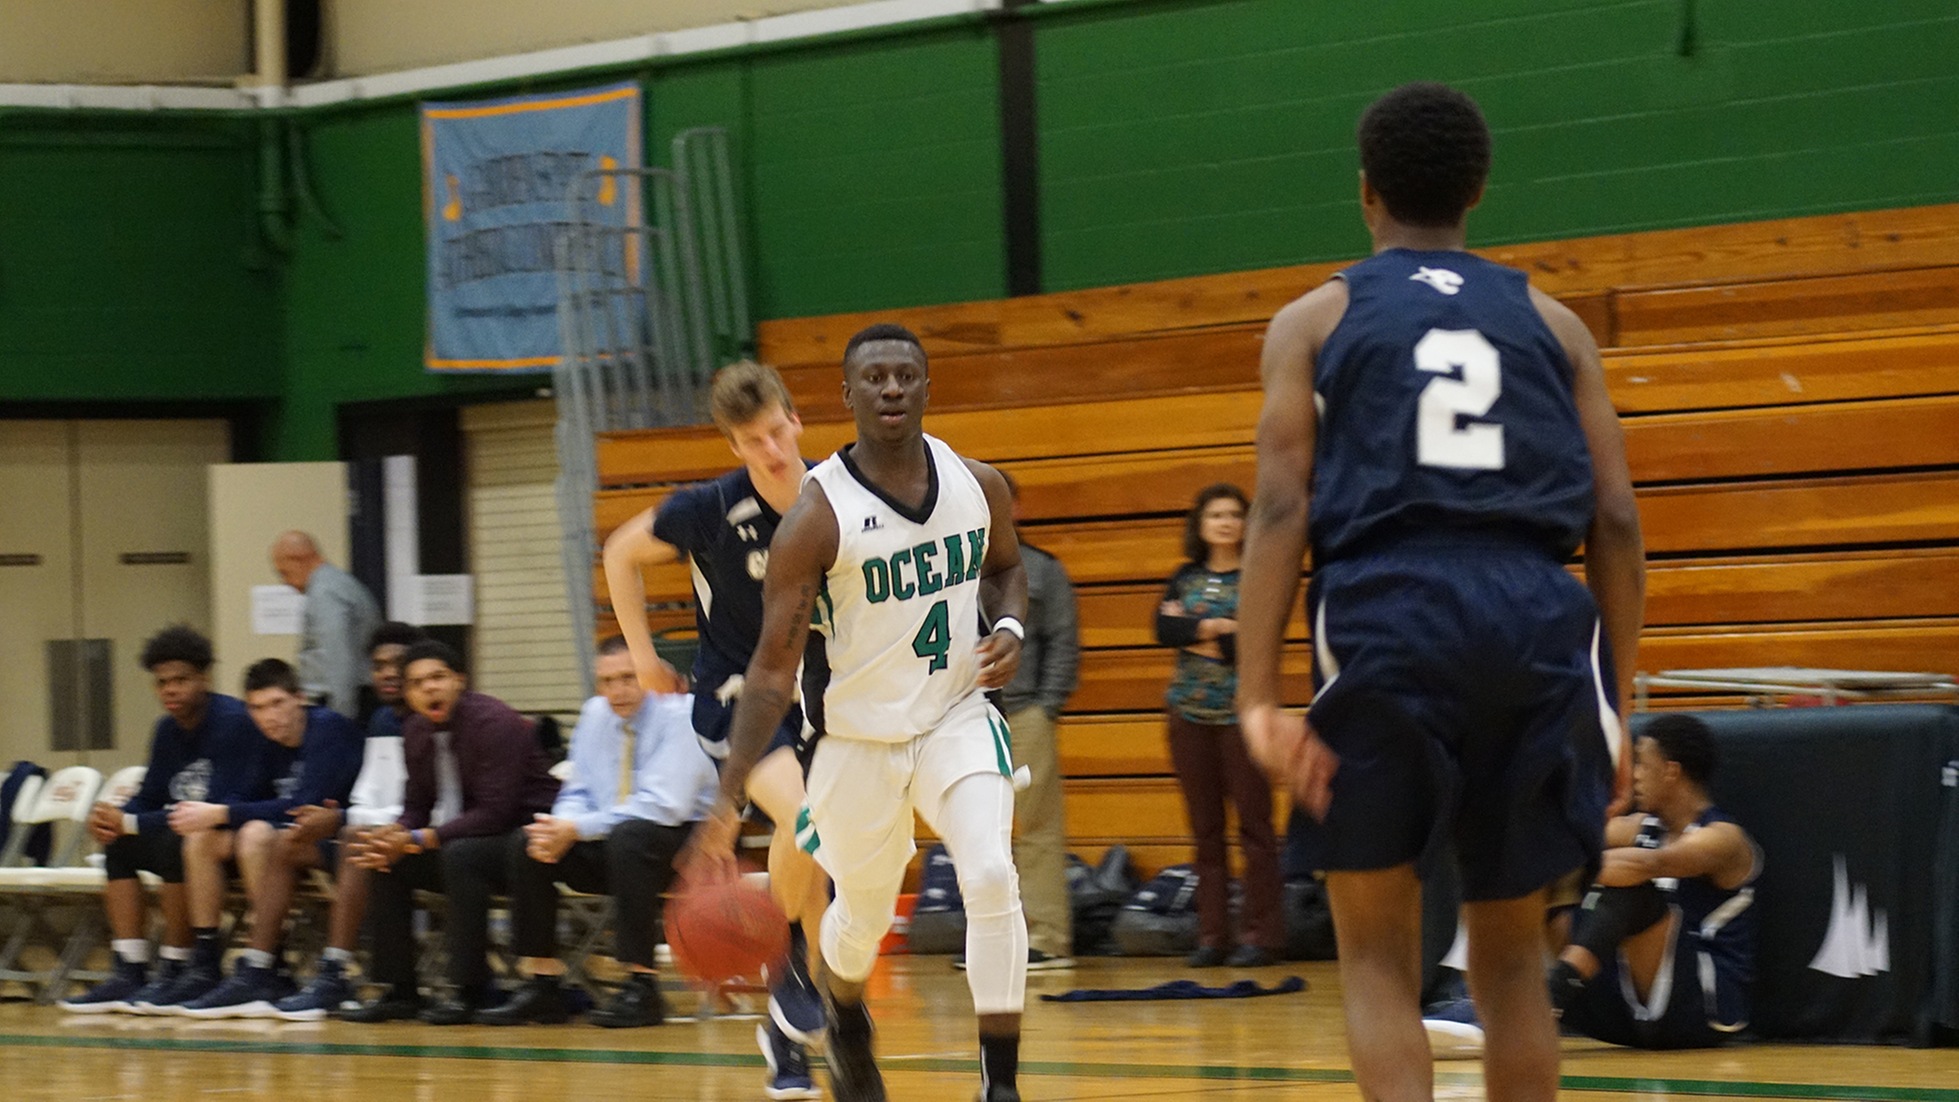 Vikings' Win Streak Stopped at 2 in 98-62 Loss to Cumberland